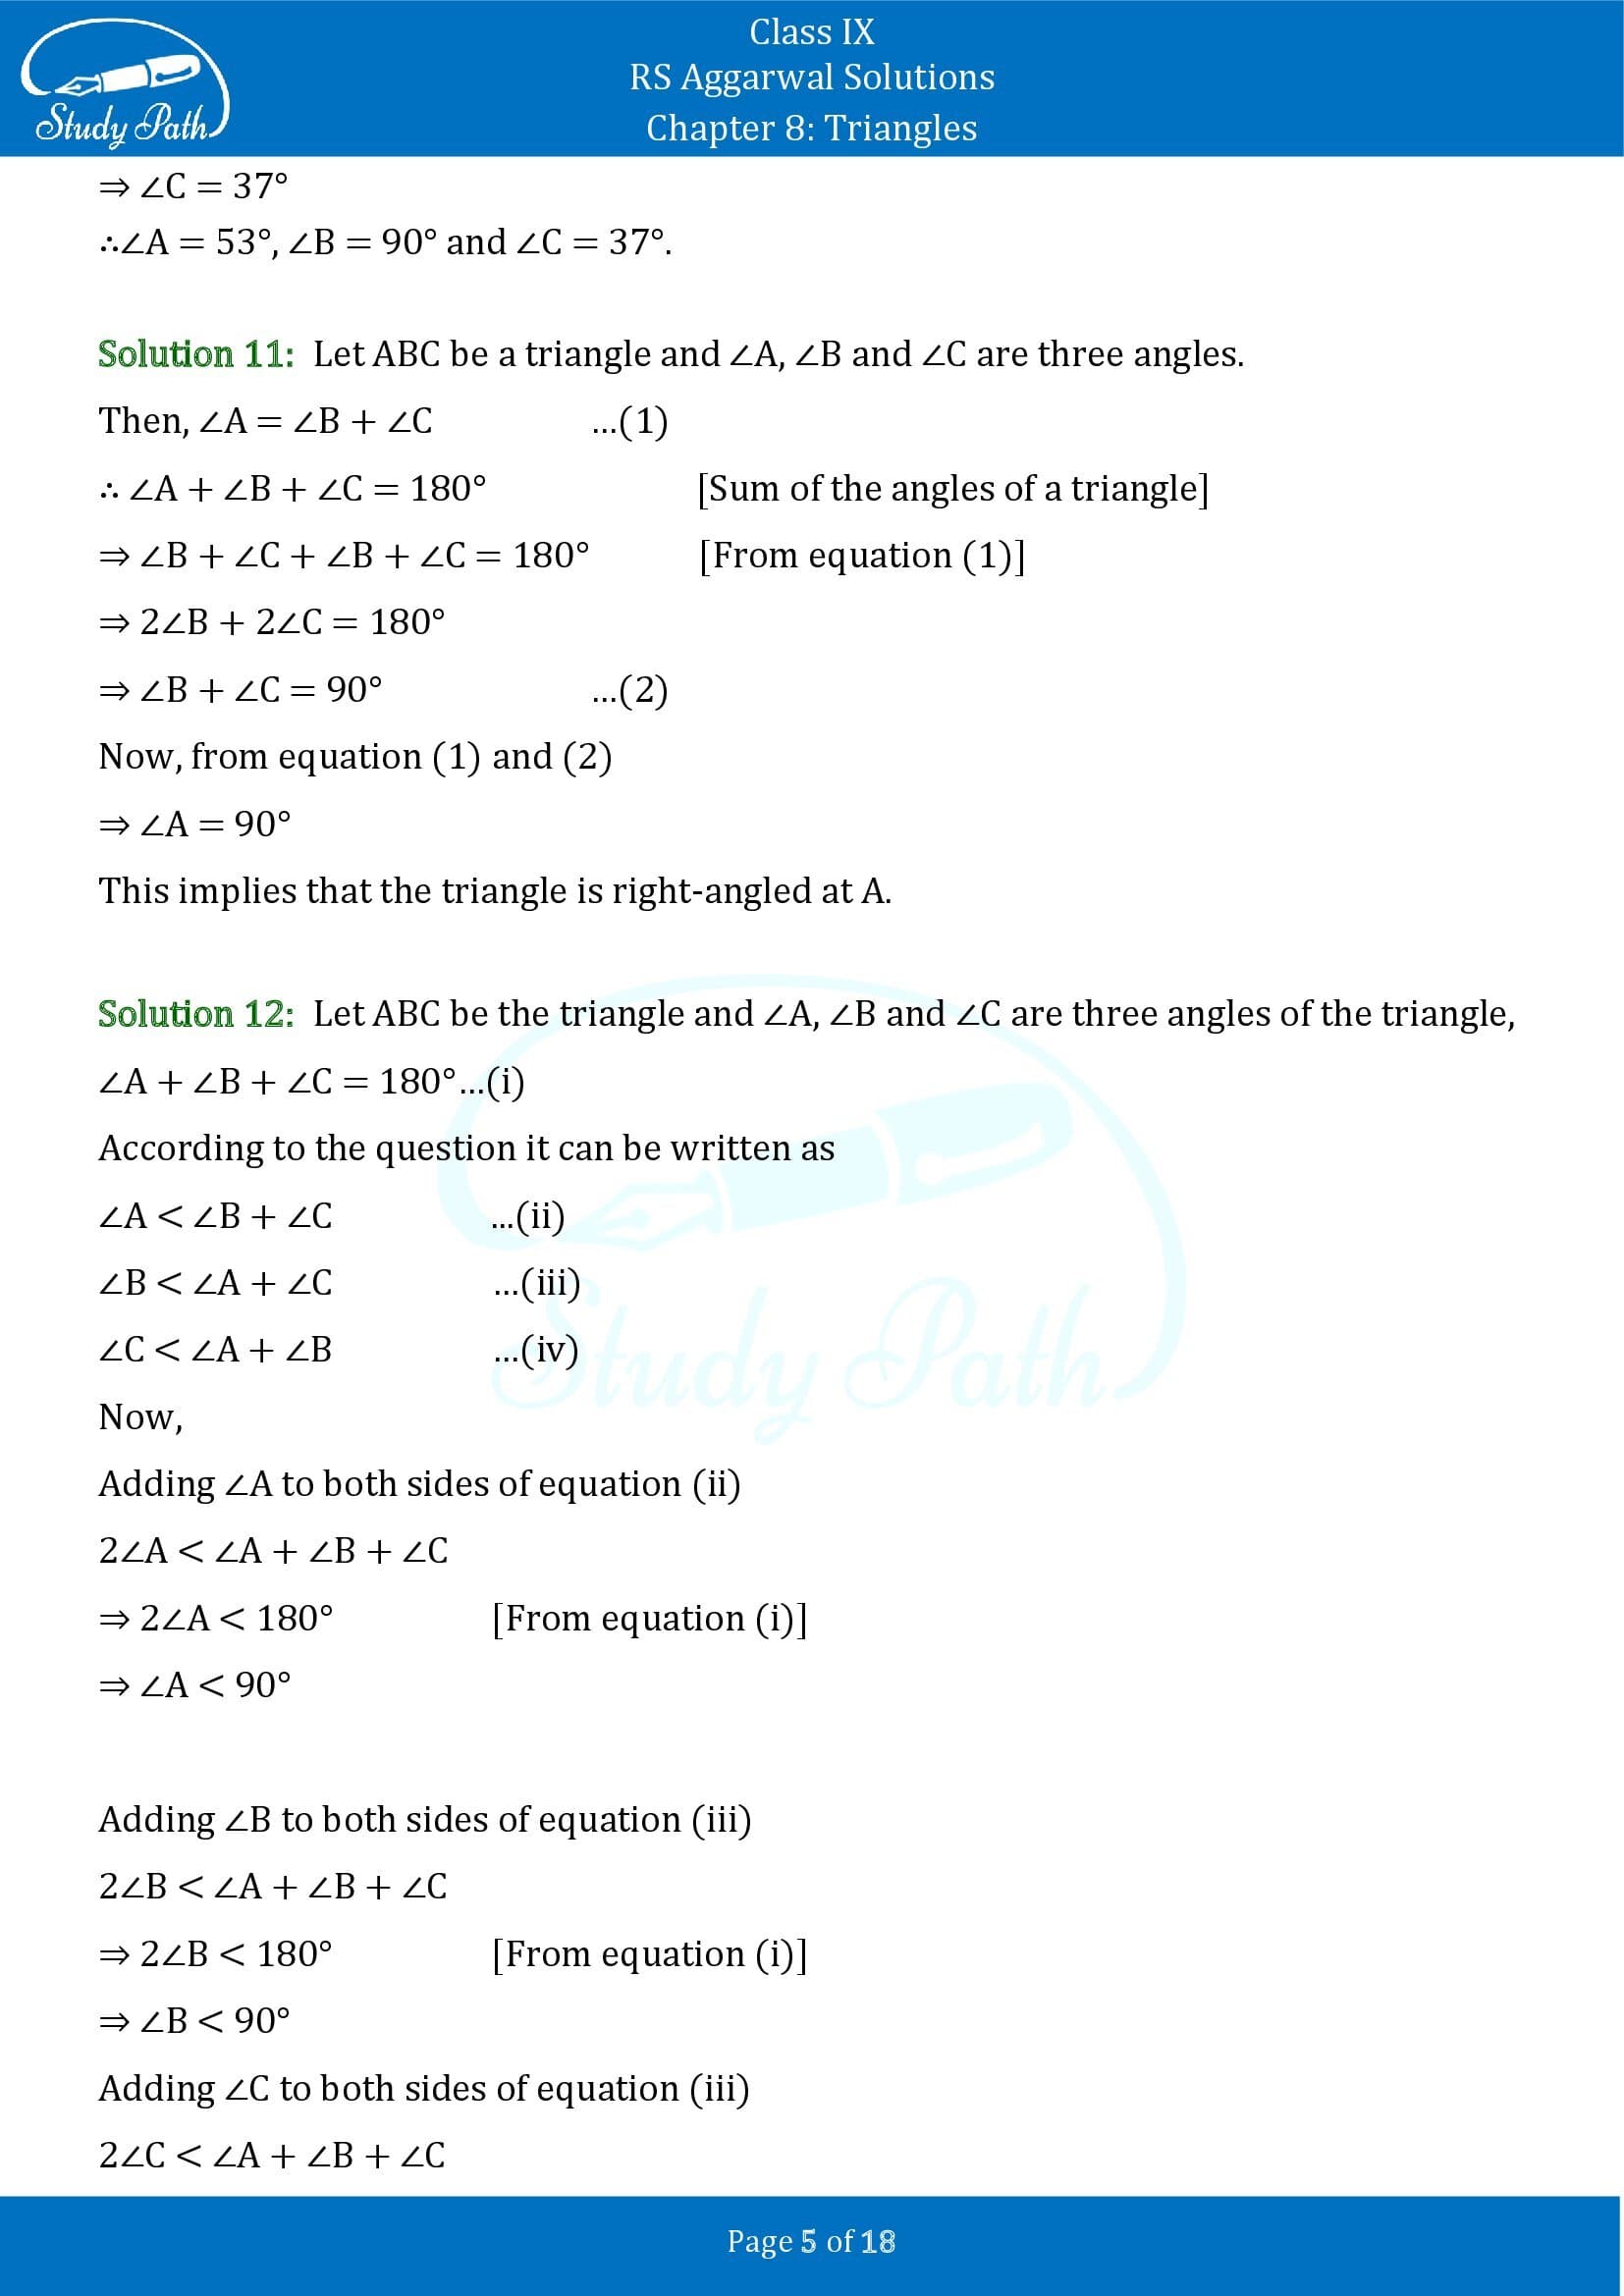 RS Aggarwal Solutions Class 9 Chapter 8 Triangles Exercise 8 0005